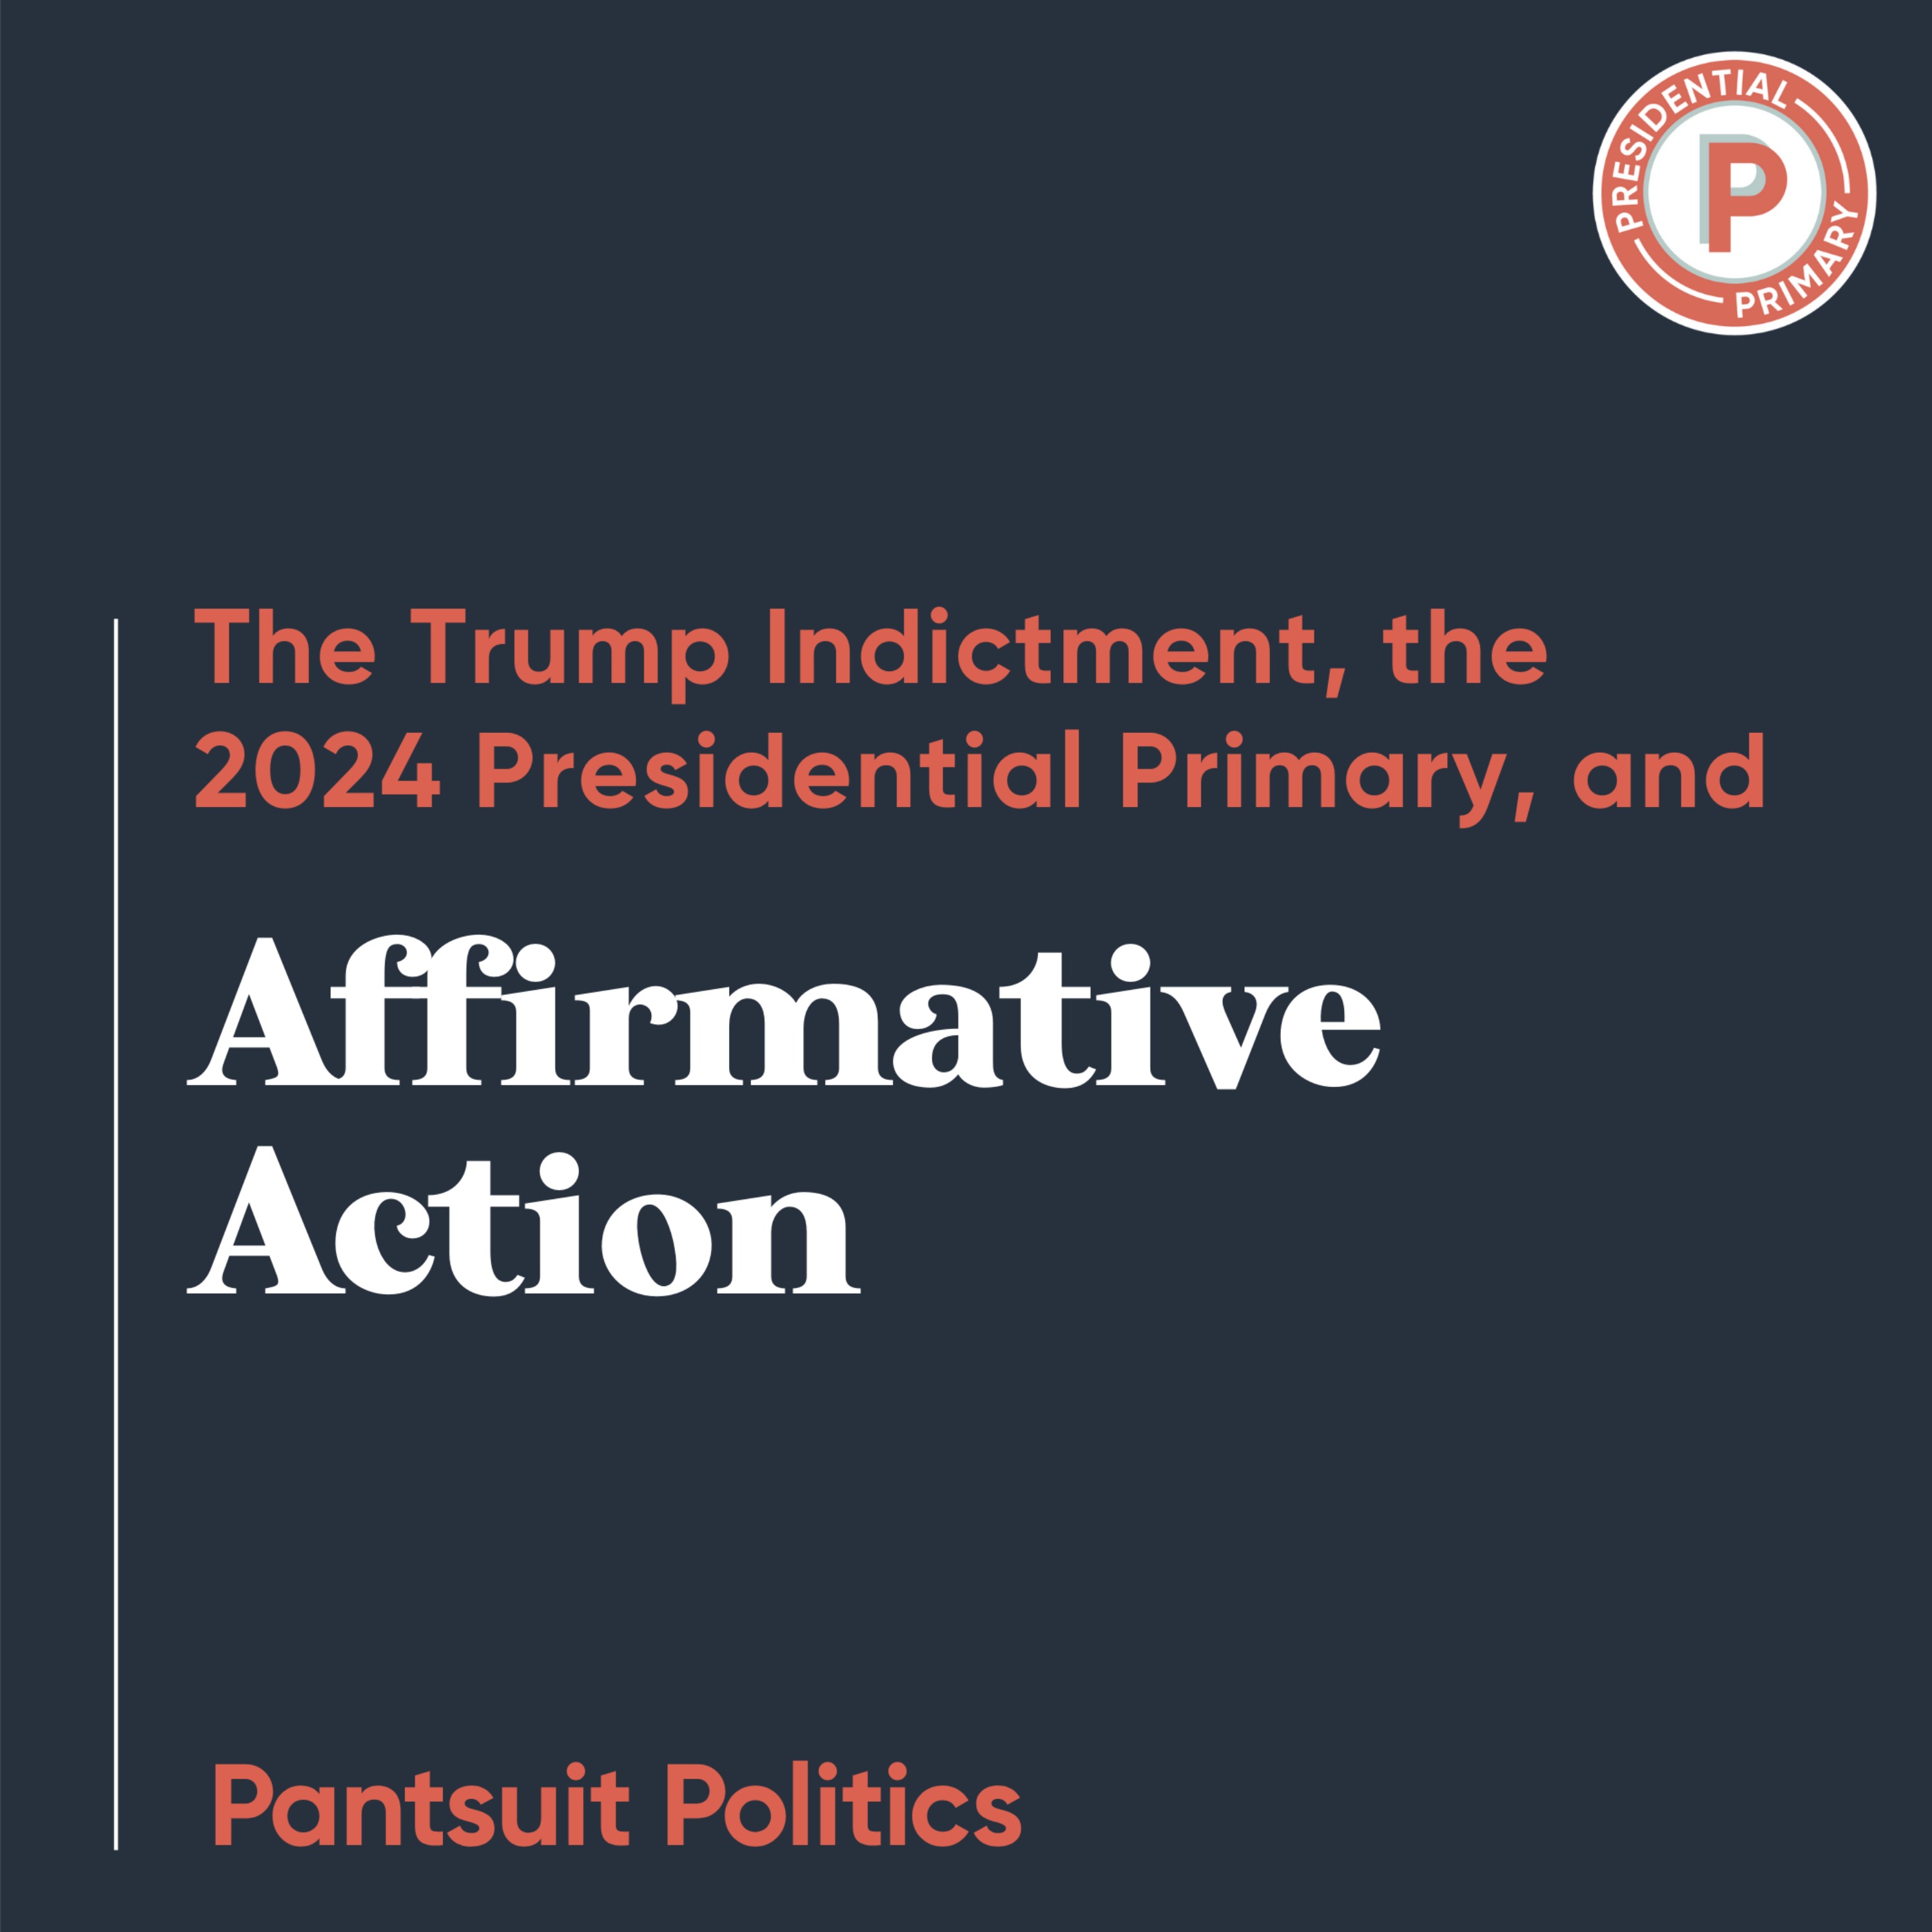 The Trump Indictment, the 2024 Presidential Primary, and Affirmative Action